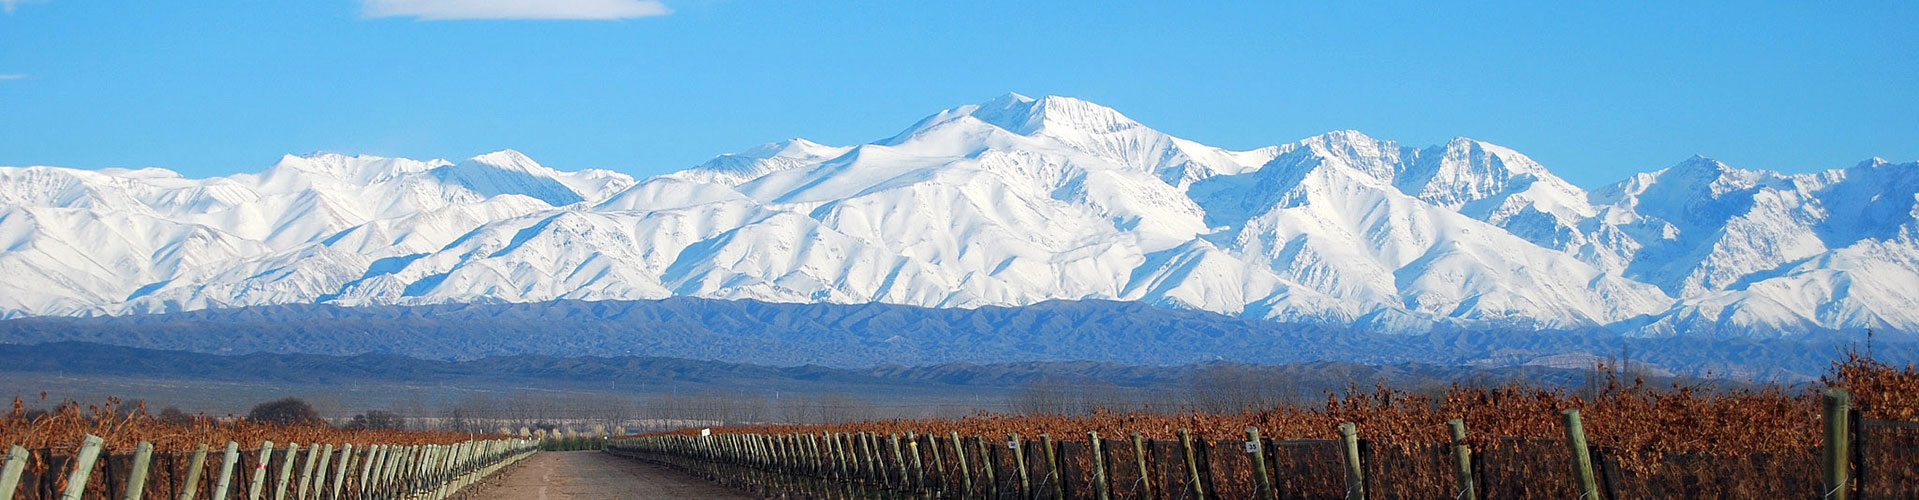 The snowcapped Andes Mountain Range as seen from a vineyard in Argentina.